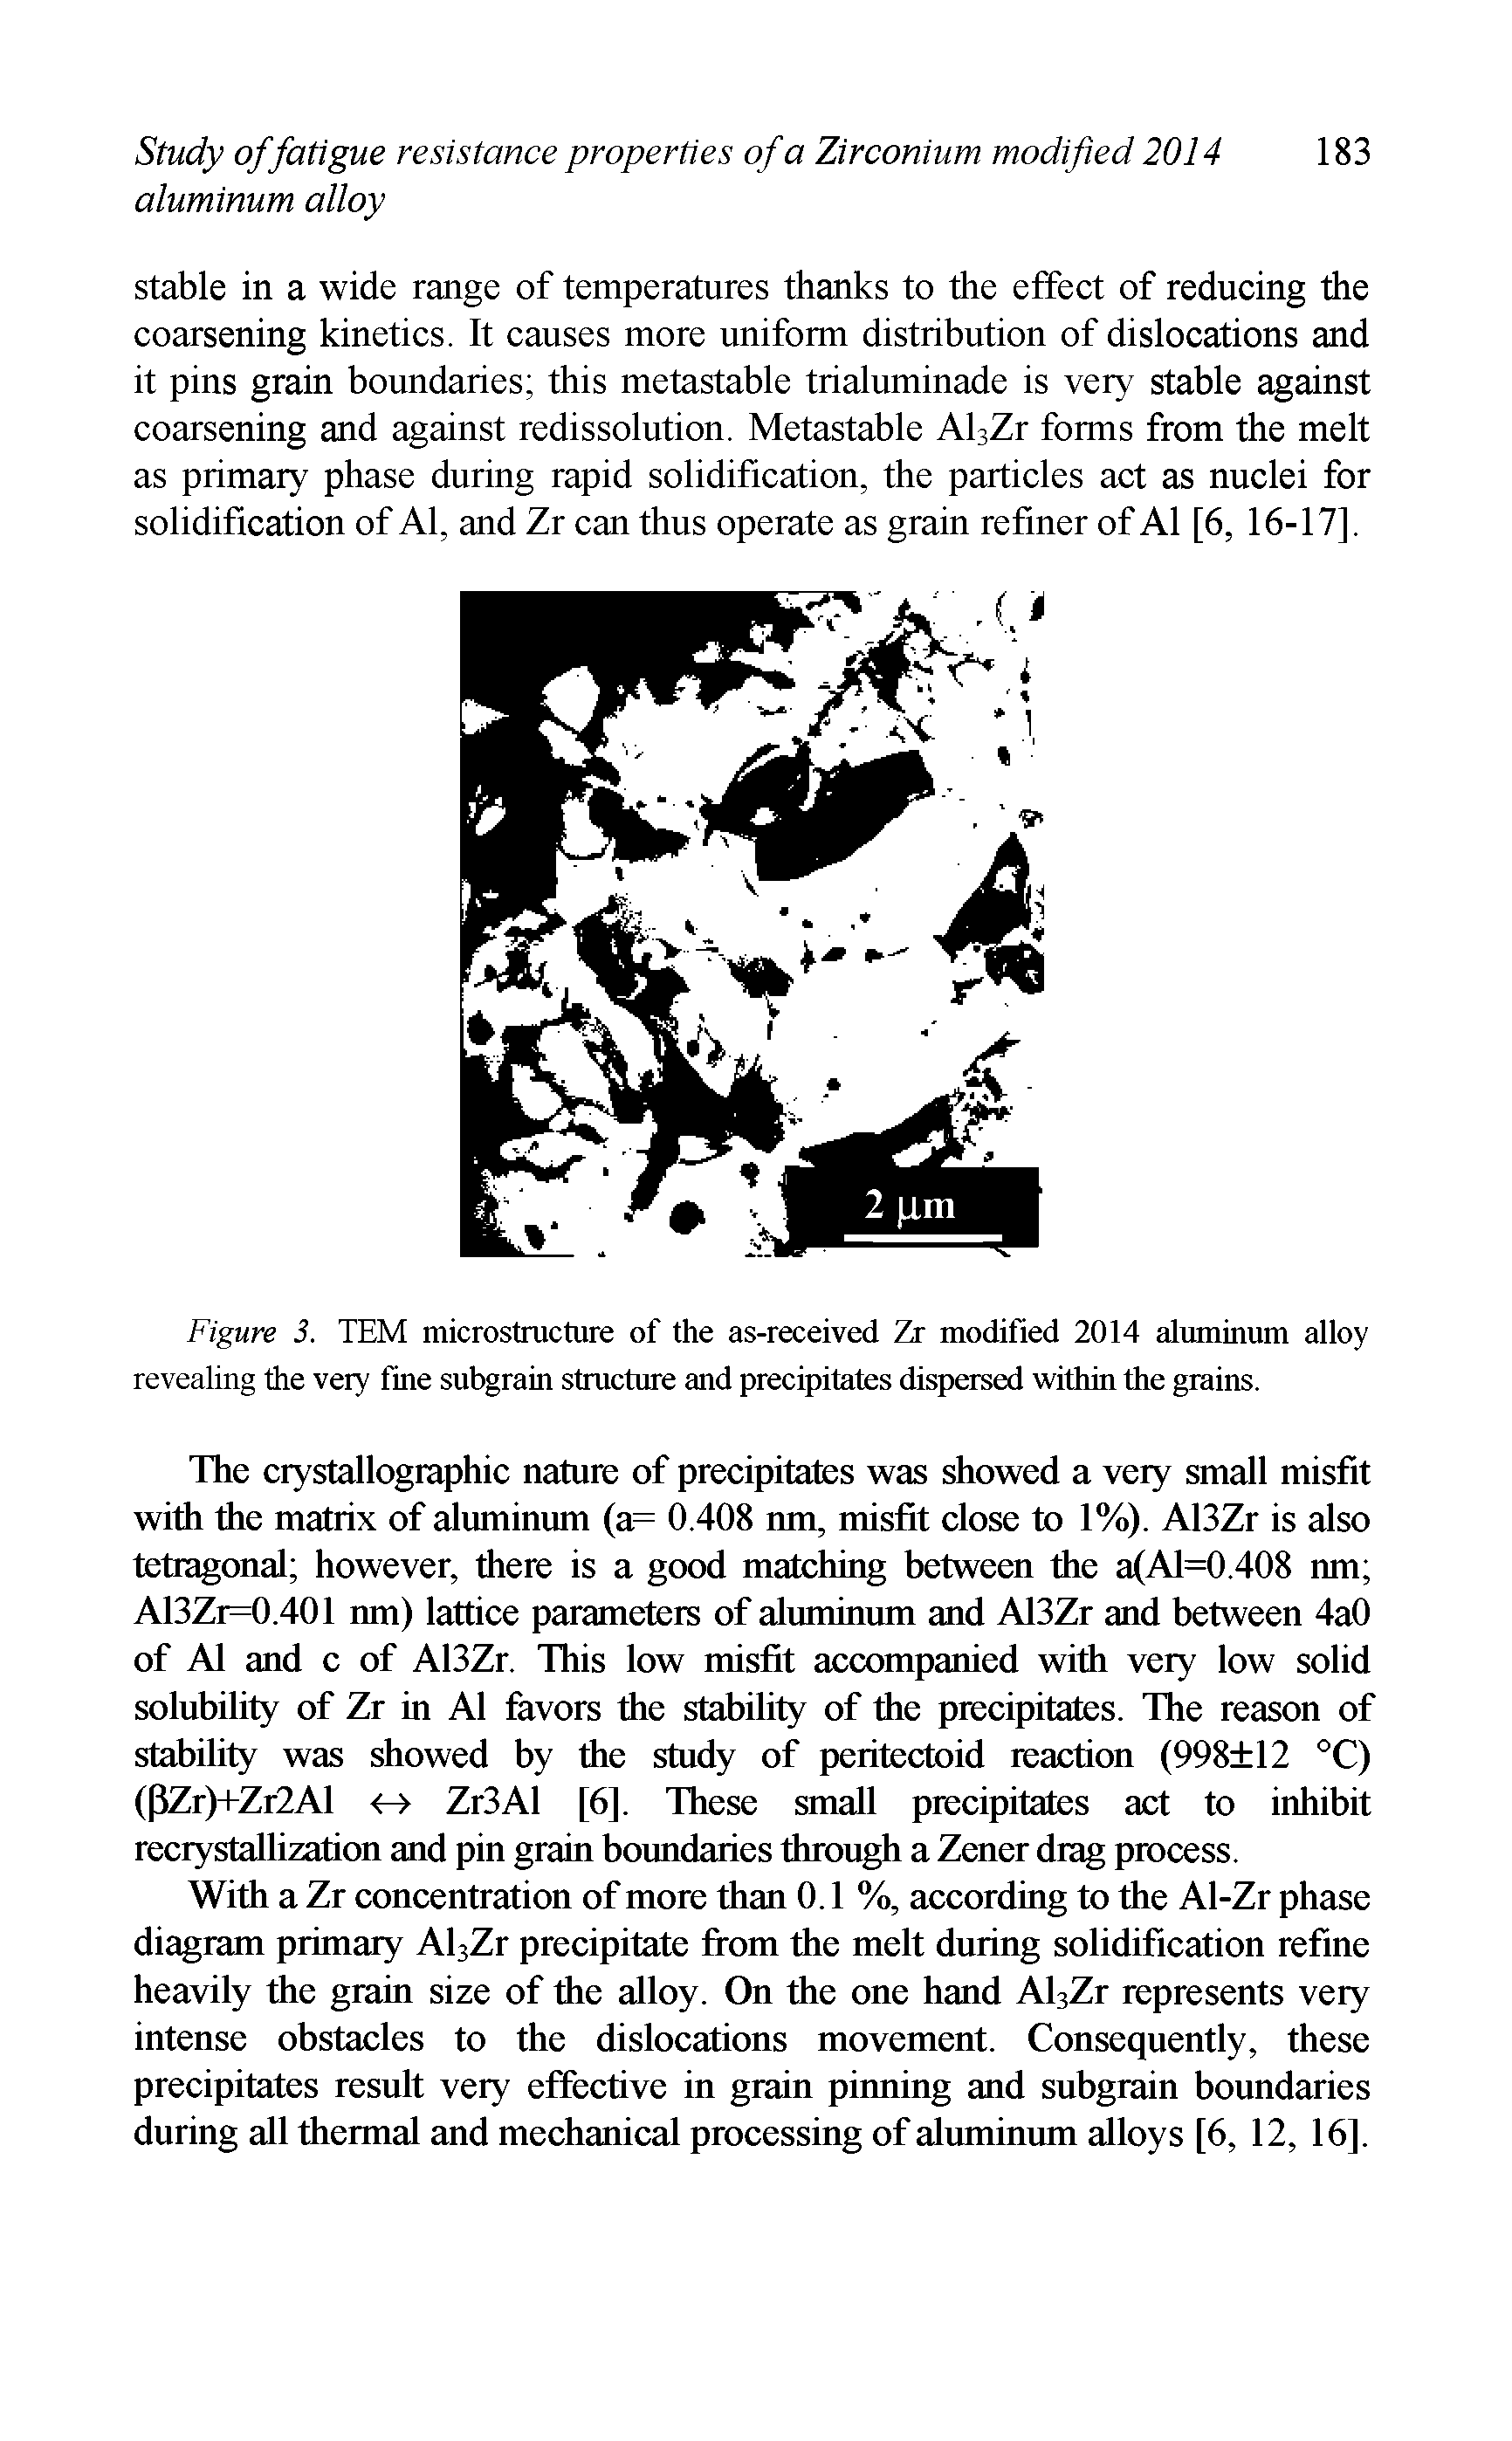 Figure 3. TEM microstructure of the as-received Zr modified 2014 aluminum alloy revealing the very fine subgrain structure and precipitates dispersed within the grains.